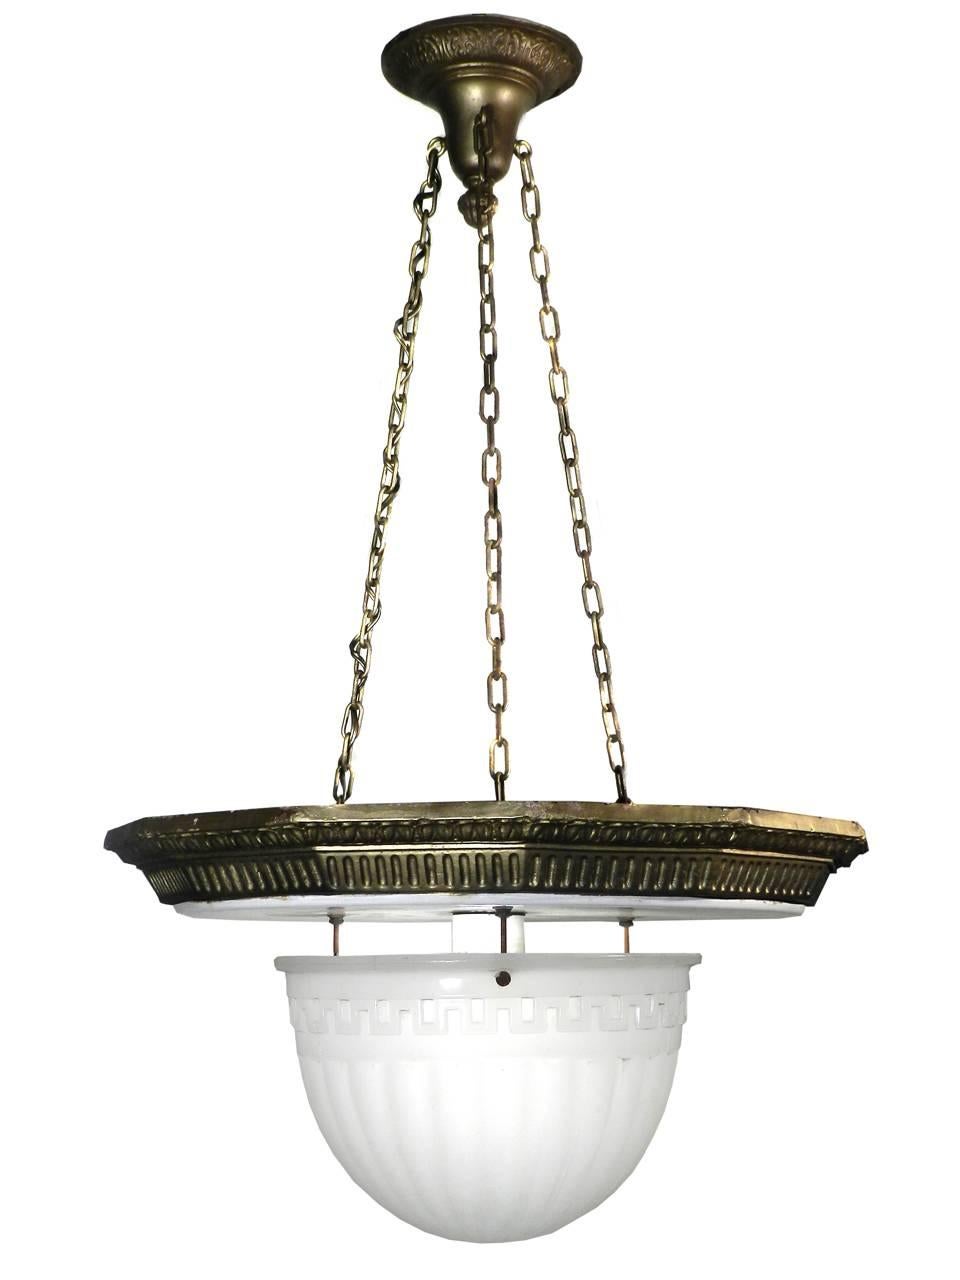 American Classical Large Brascolite Chandelier